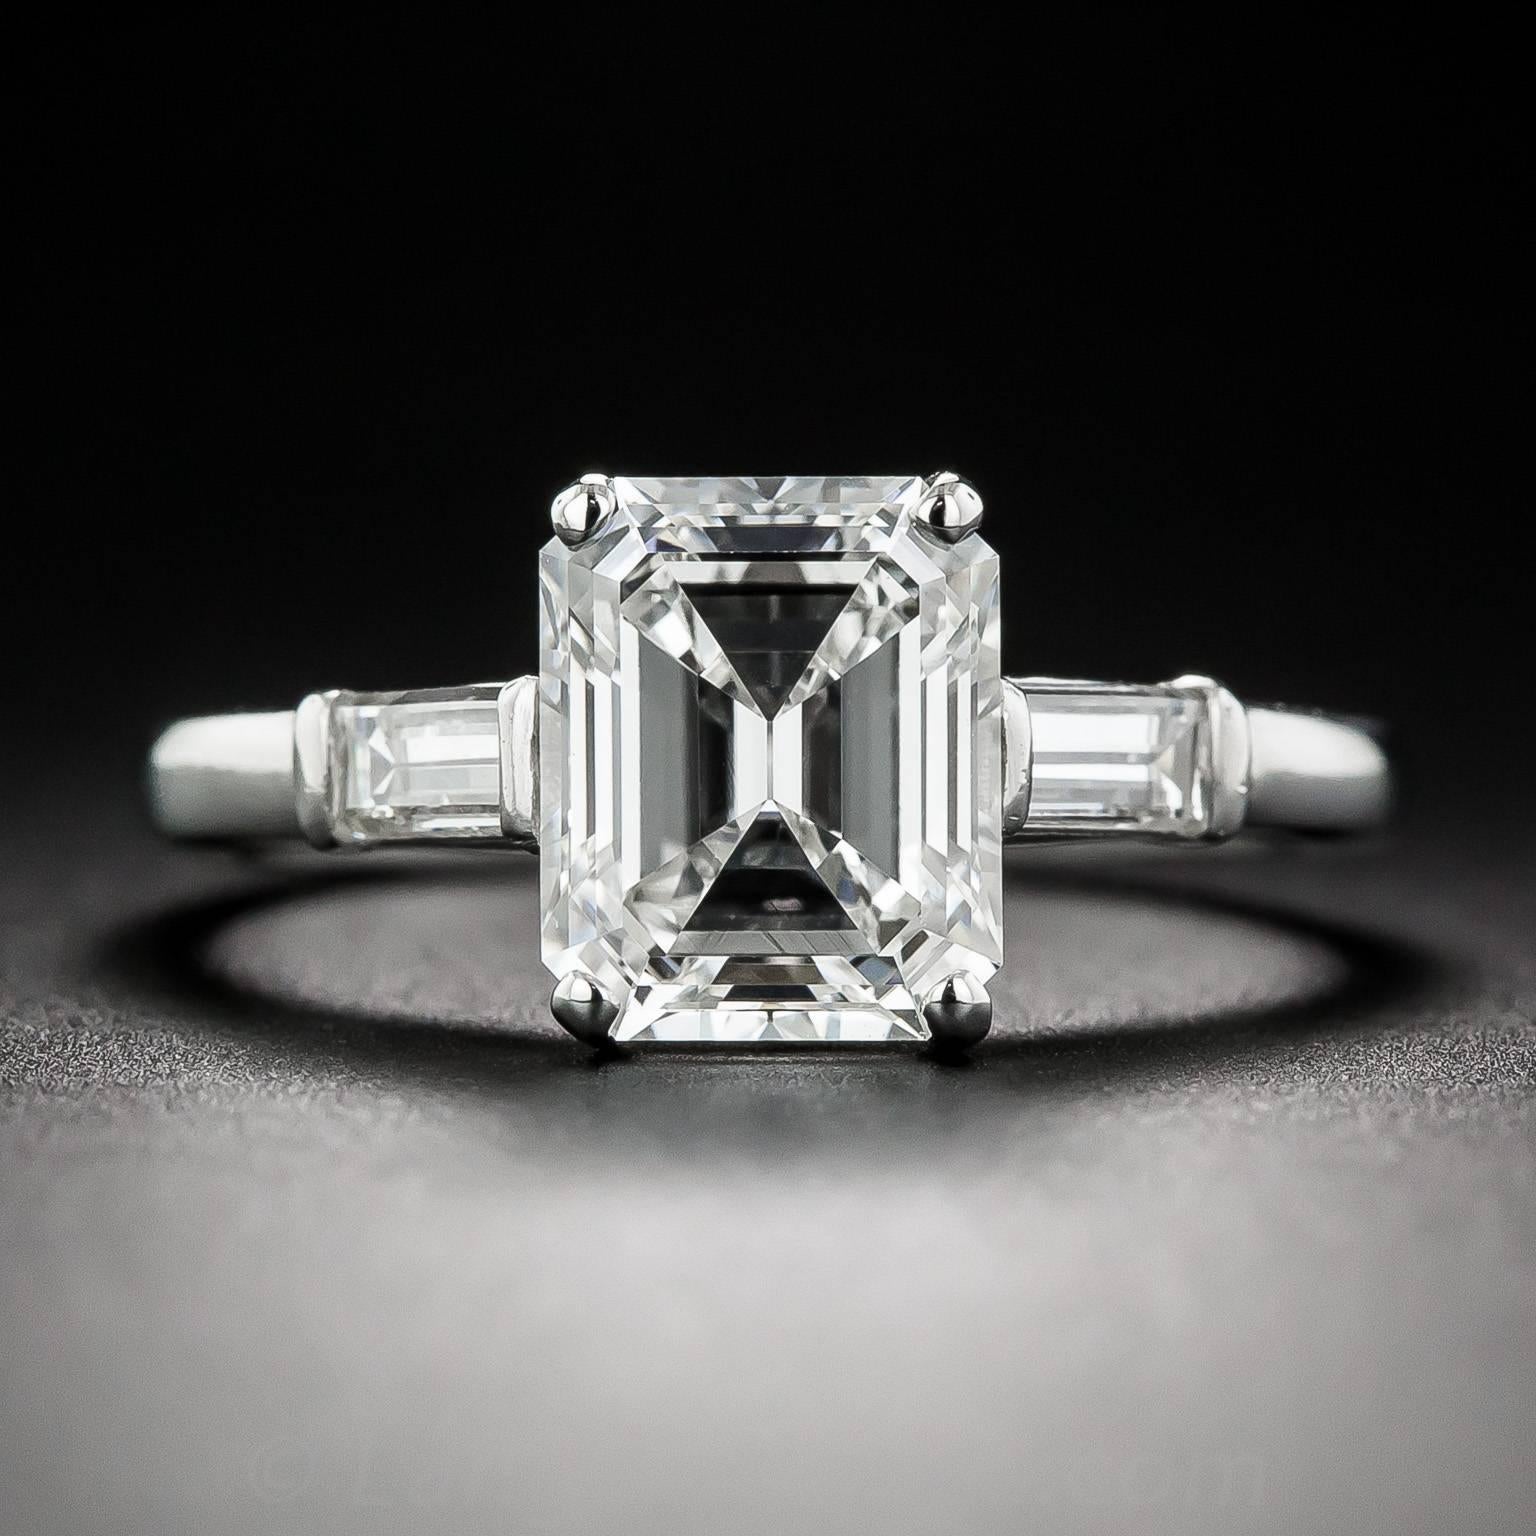 Understated elegance shines brightly in this signed Raymond Yard platinum engagement ring featuring a stunning emerald-cut diamond, weighing 2.21 carats, with exceptional F color and VS1 clarity. Raymond Yard aimed for timeless, classic style in his